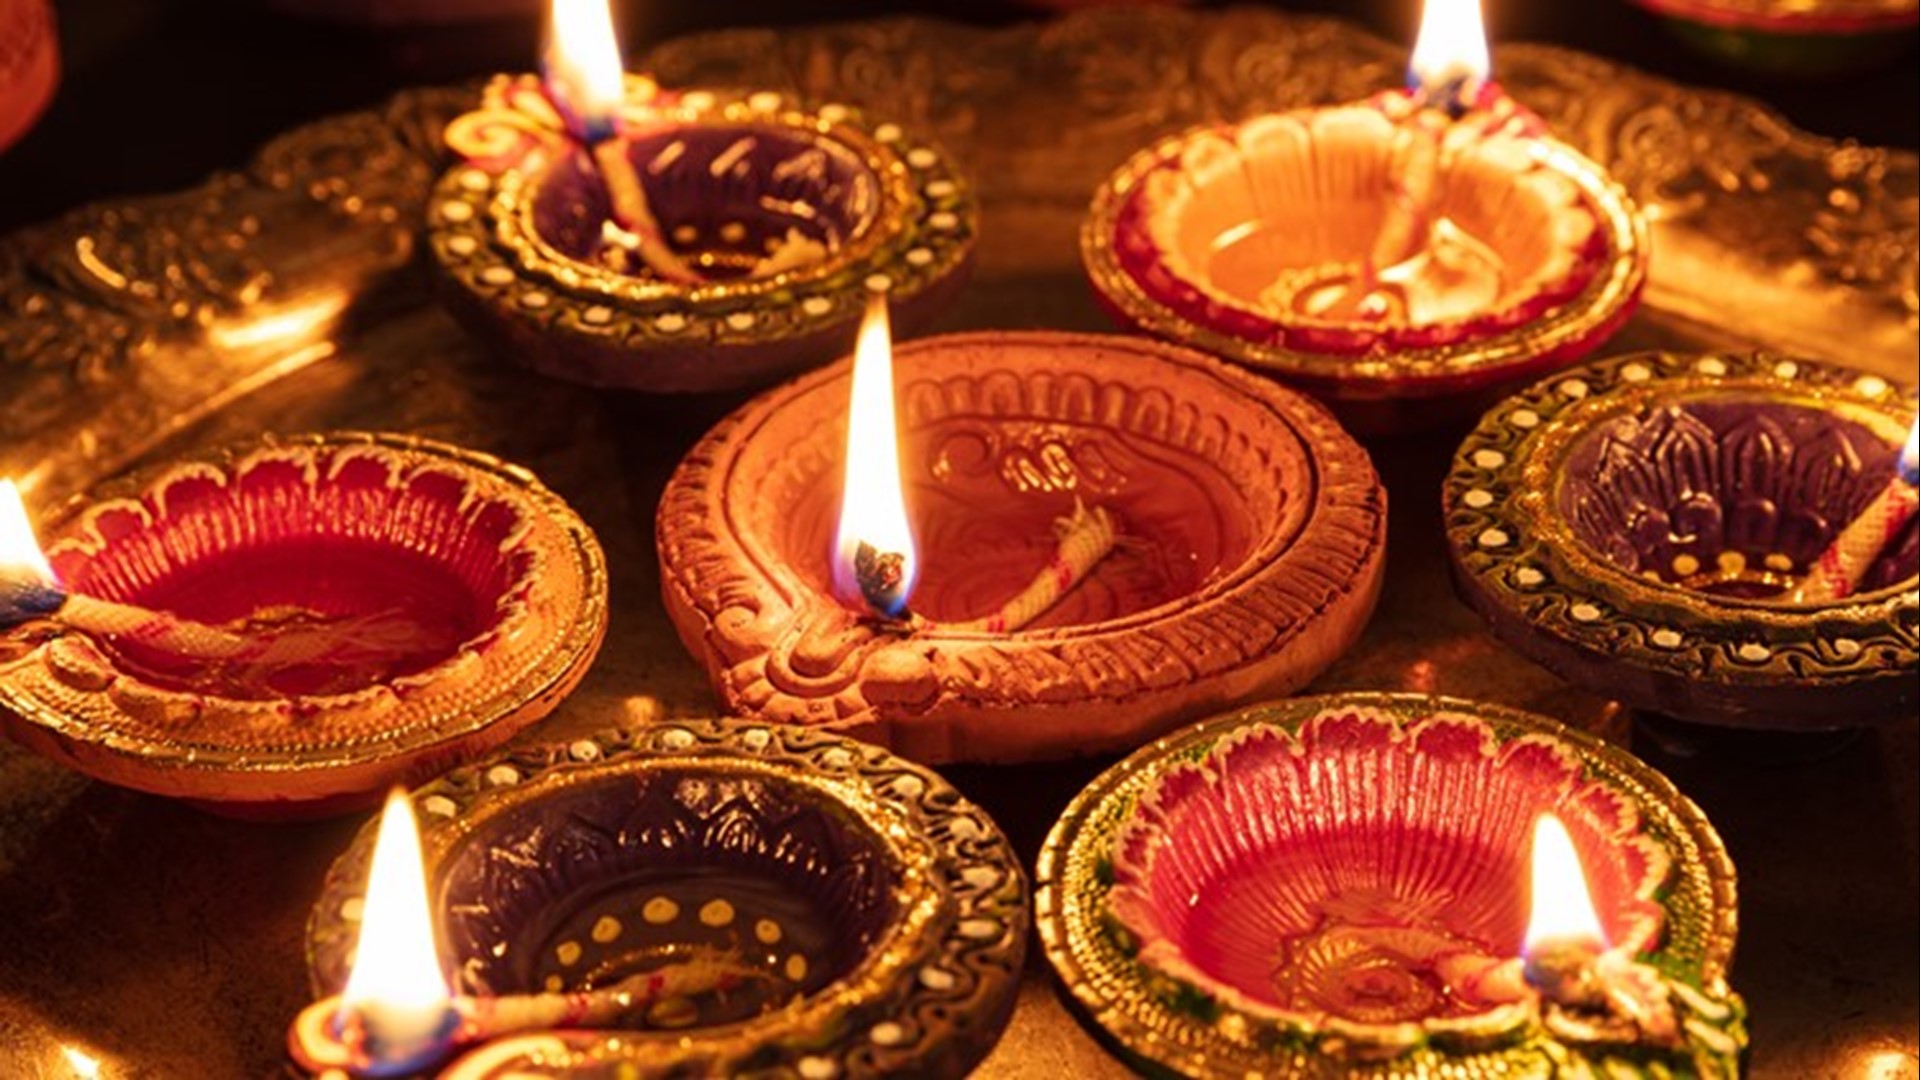 India's festival of lights is coming to Spokane to celebrate spirituality and culture.